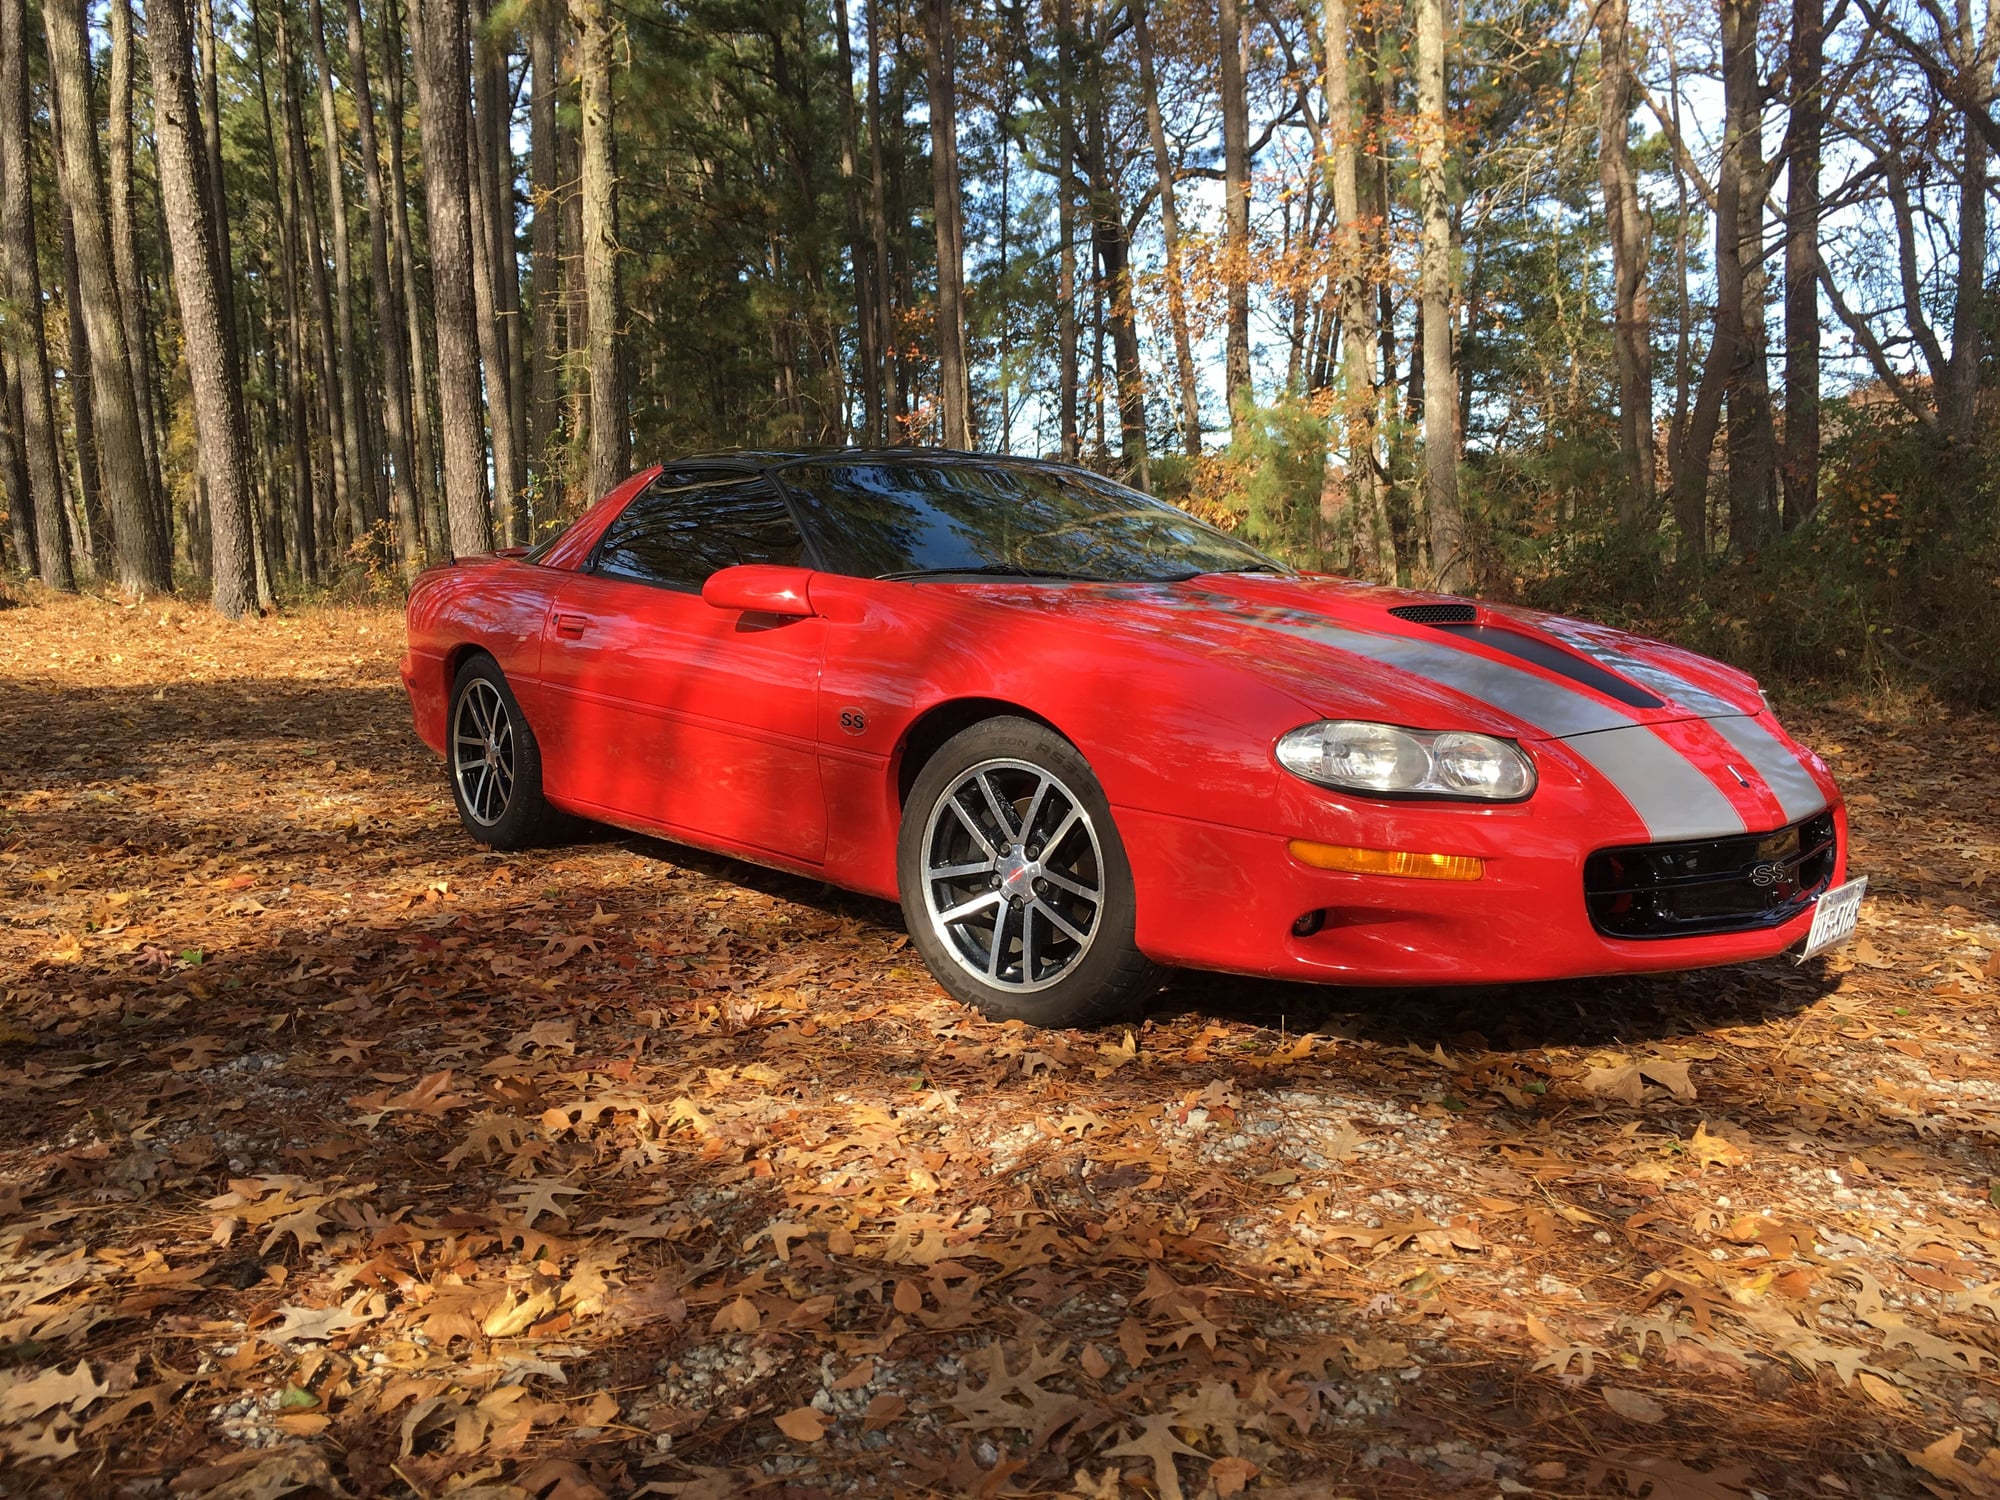 2002 Chevrolet Camaro - 2002 Chevrolet Camaro SS LE 12,000 Miles - Used - VIN 2G1FP22G122123148 - 12,000 Miles - 8 cyl - 2WD - Automatic - Coupe - Red - Fort Eustis, VA 23604, United States